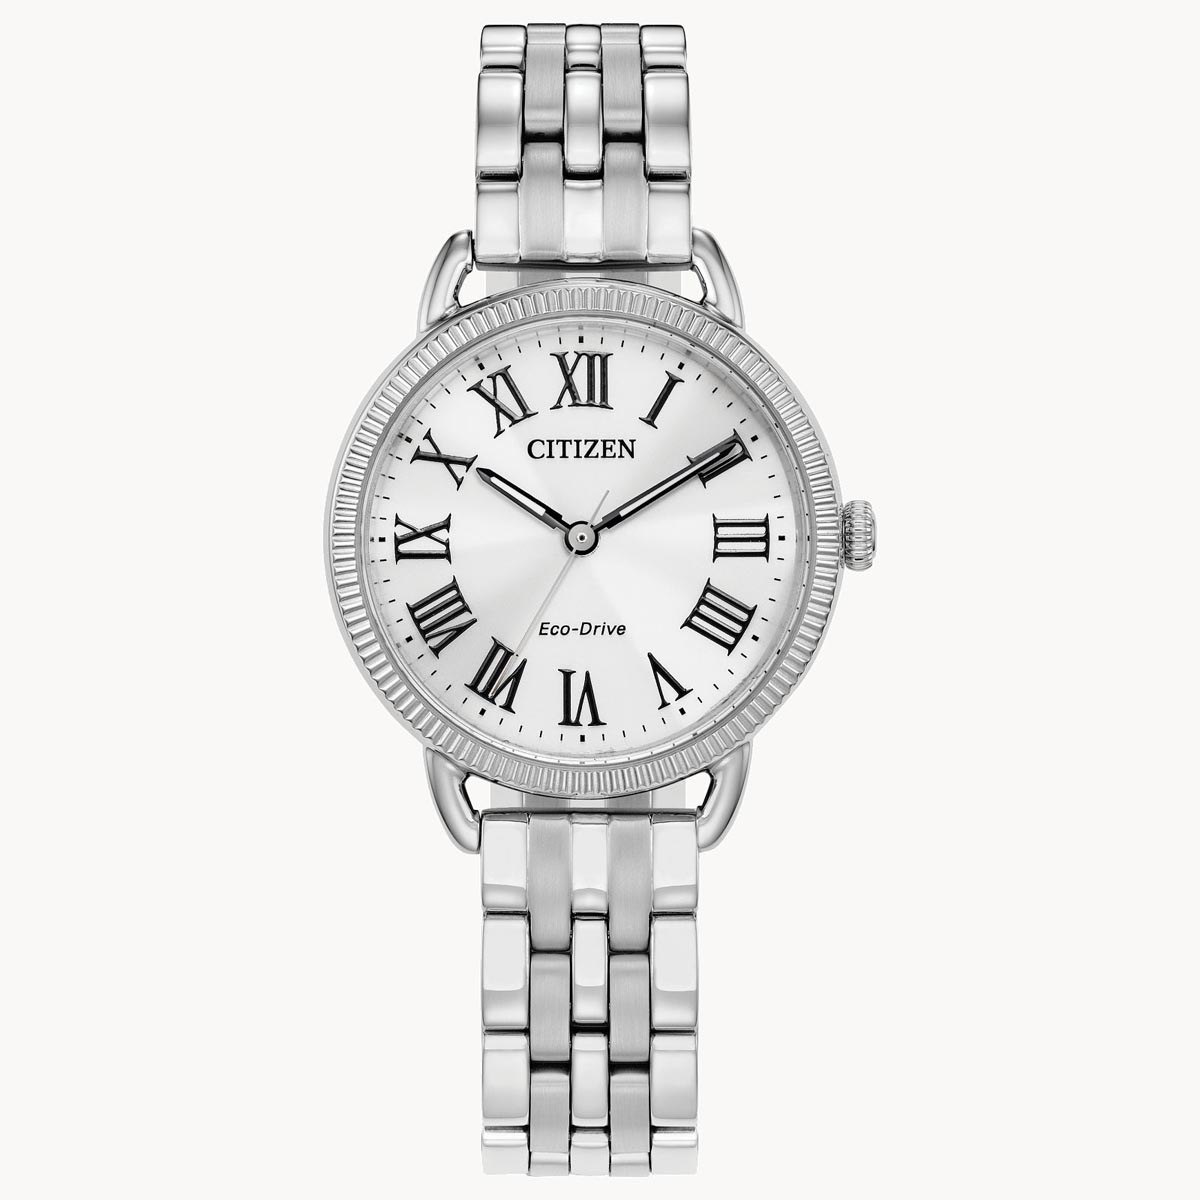 Citizen Coin Edge Womens Watch with White Dial and Stainless Steel Bracelet (eco drive movement)